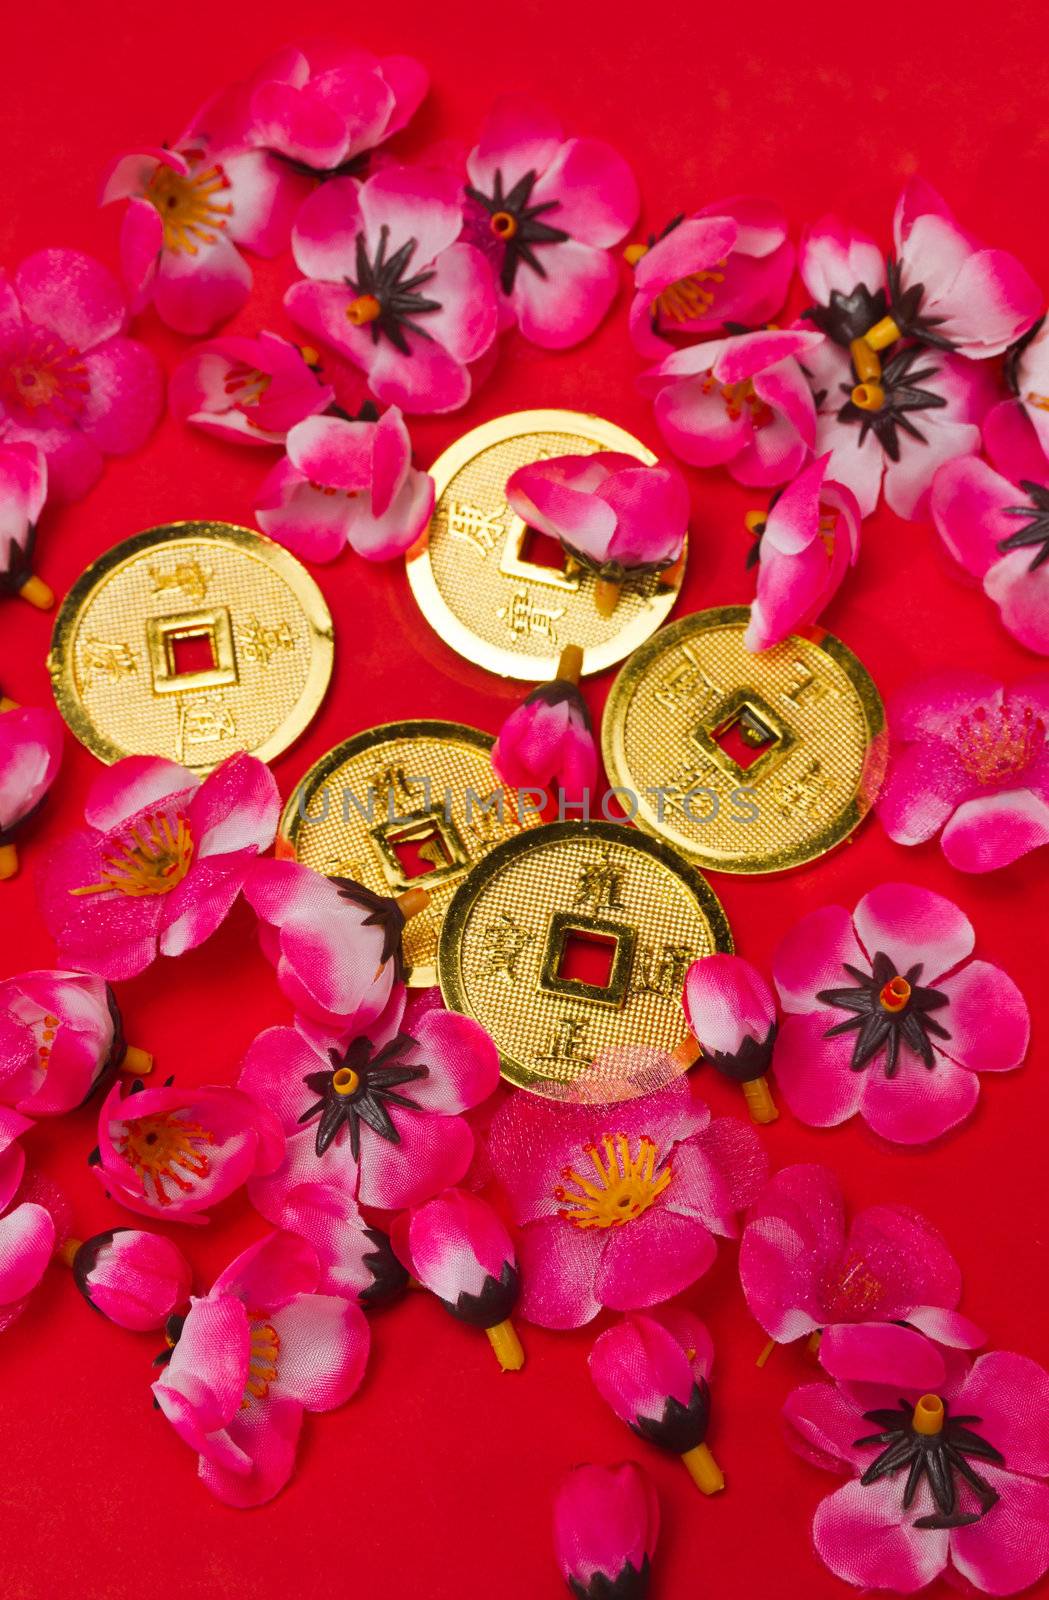 Golden coins ornaments with plastic cherry blossoms on red surface for CNY celebration in portrait orientation